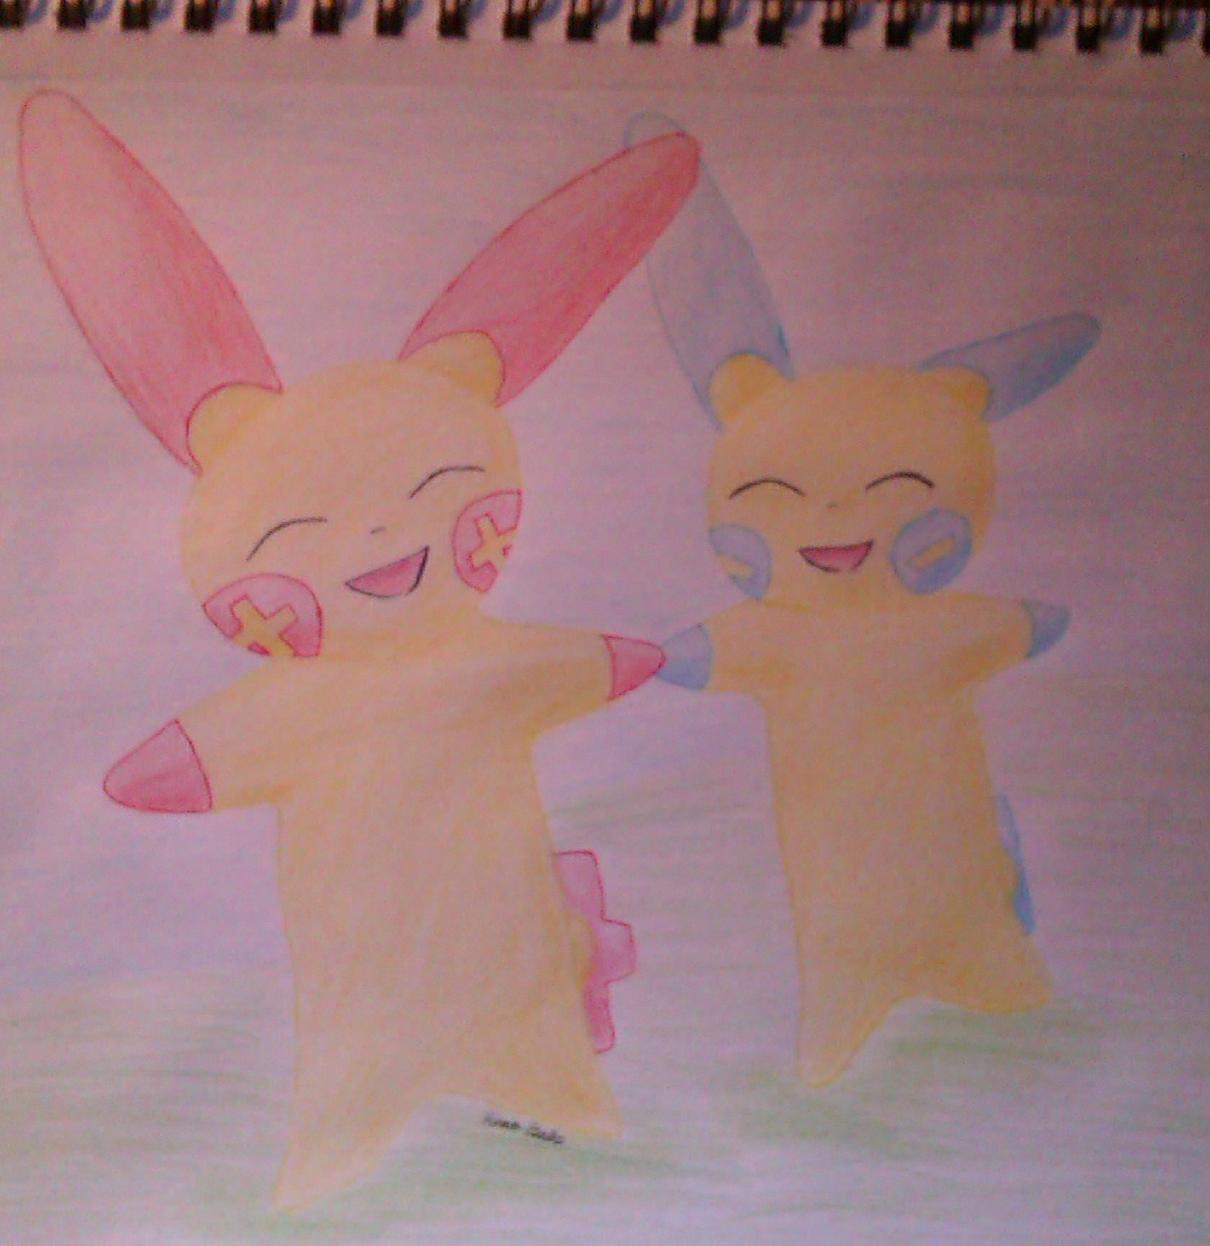 plusel and minun (color pencil) by Wishsayer